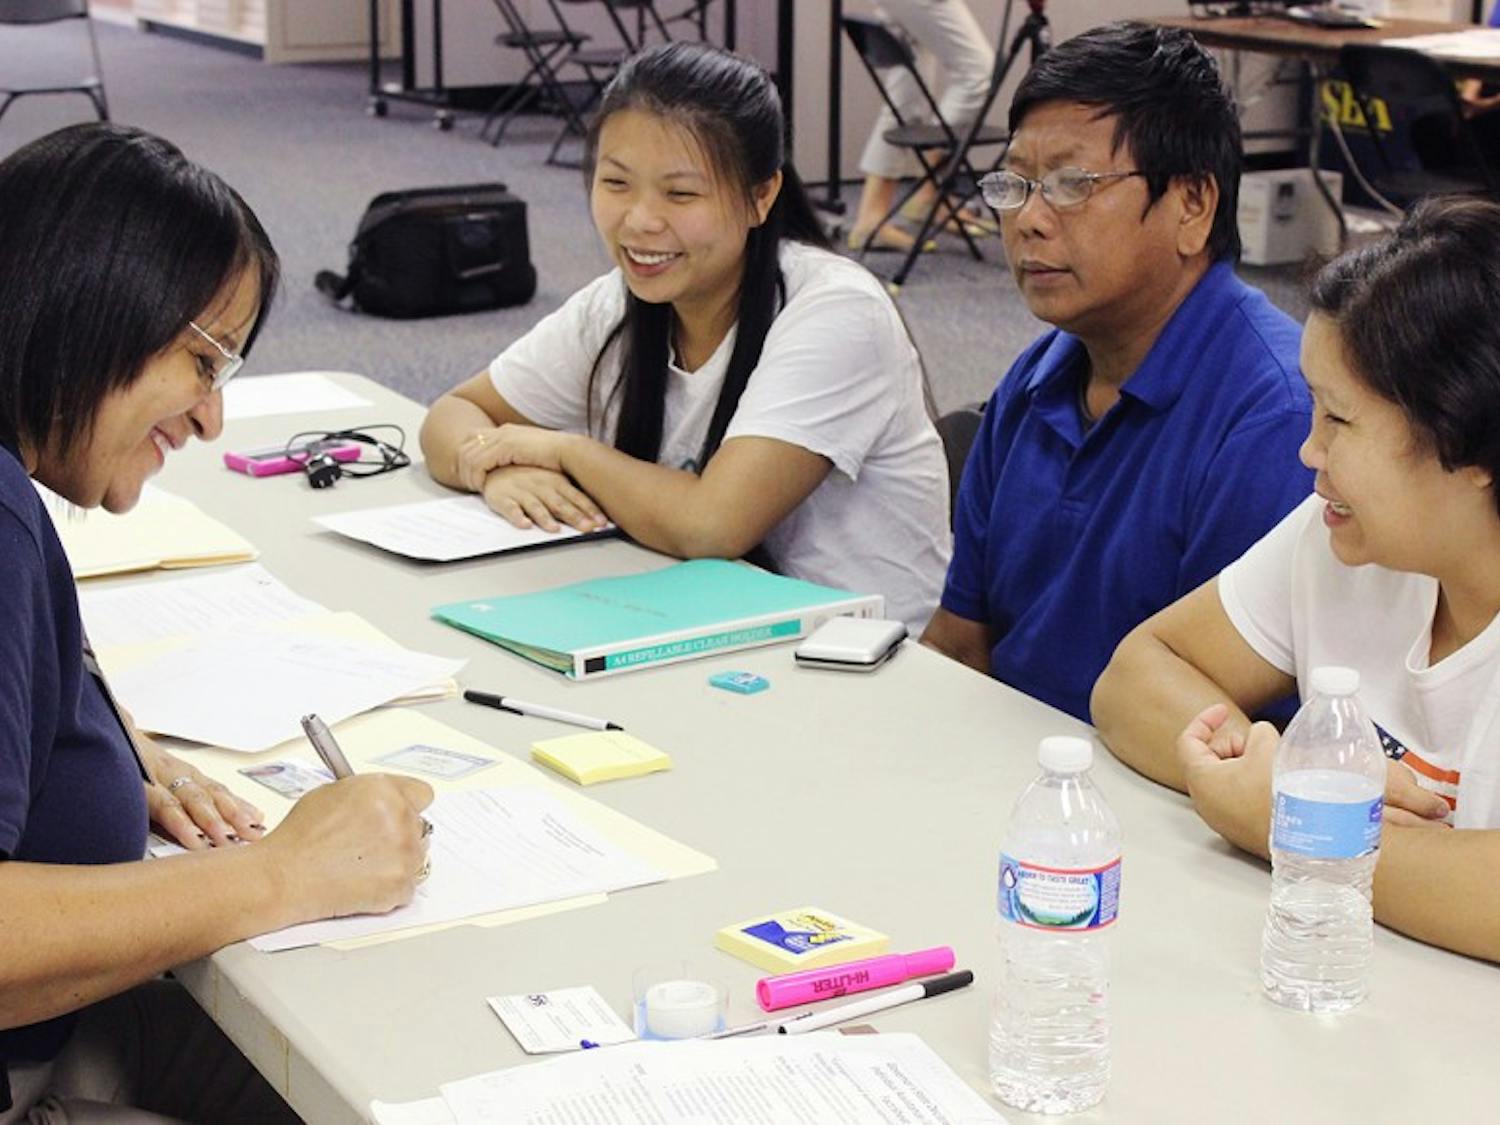 Hnin Wai and Myint and Aye Thaung attend the Disaster Assistance Center set up in University Mall this week. 